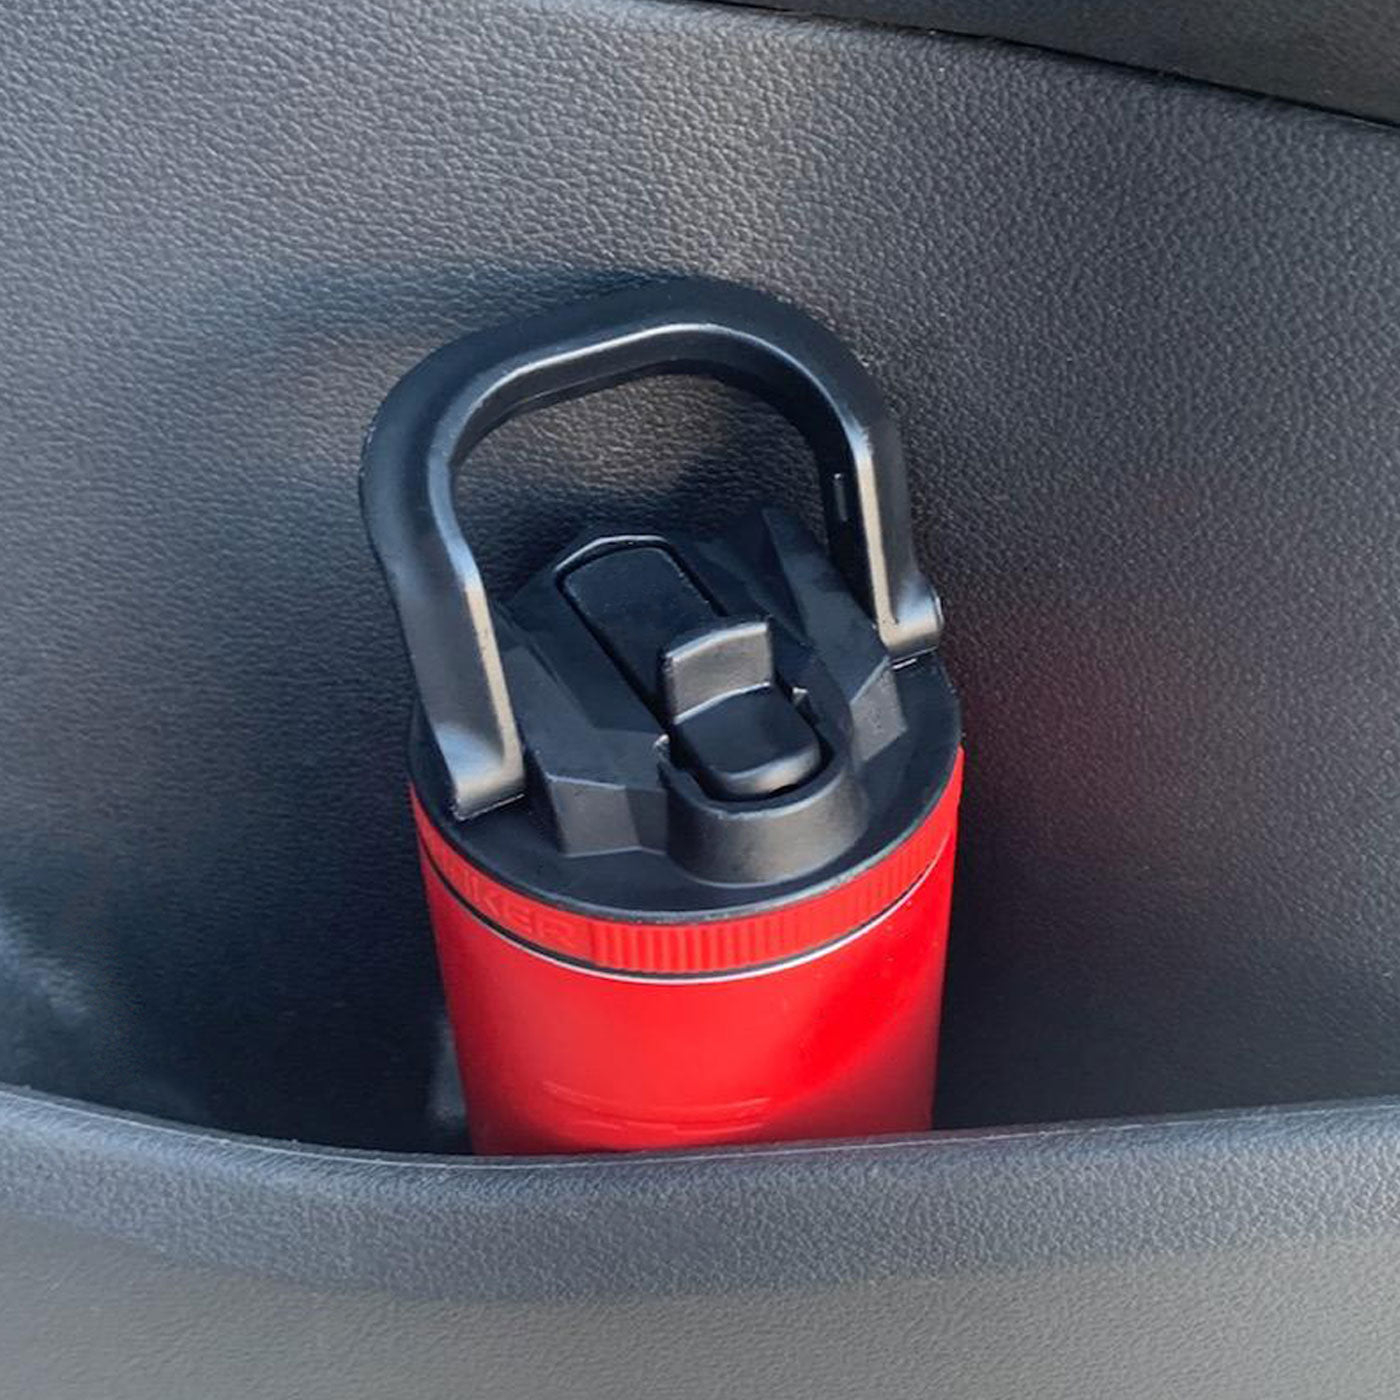 This image shows a red 14oz Sport Bottle fitting easily in the cup holder in the back door of a car.